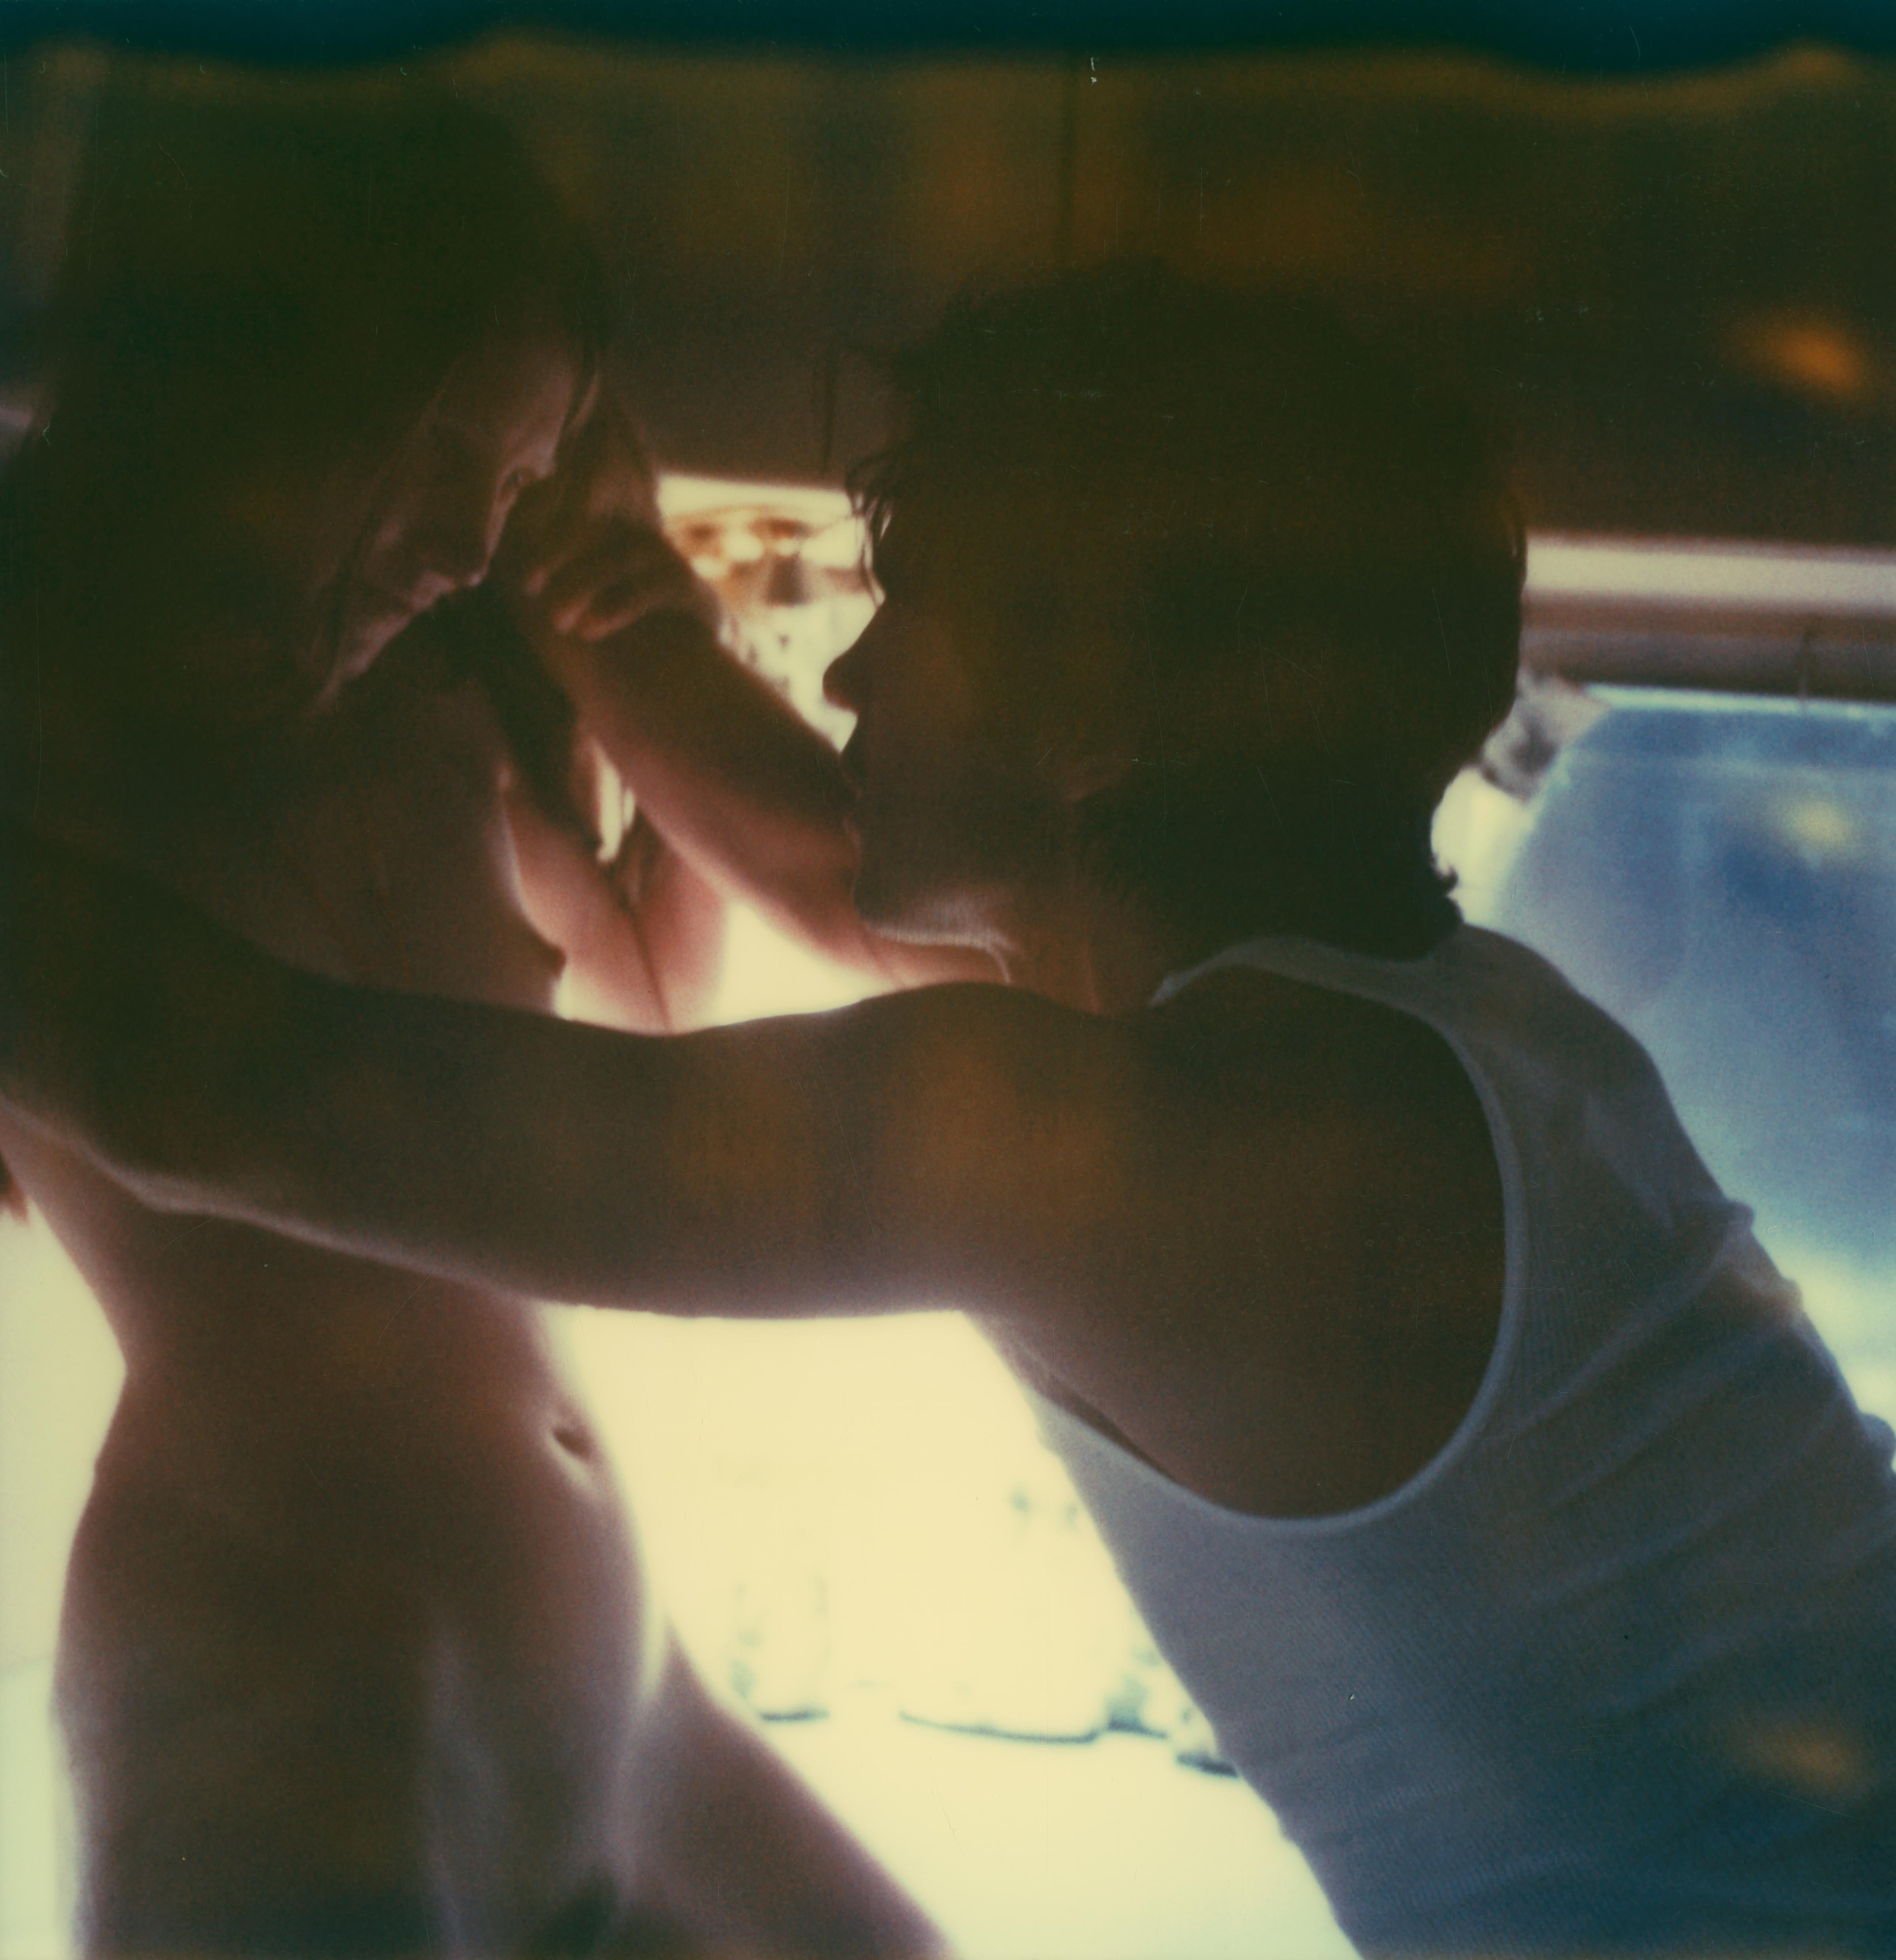 Stefanie Schneider Color Photograph - Love Scene against the Wall from Sidewinder, part 2 - Polaroid, Contemporary